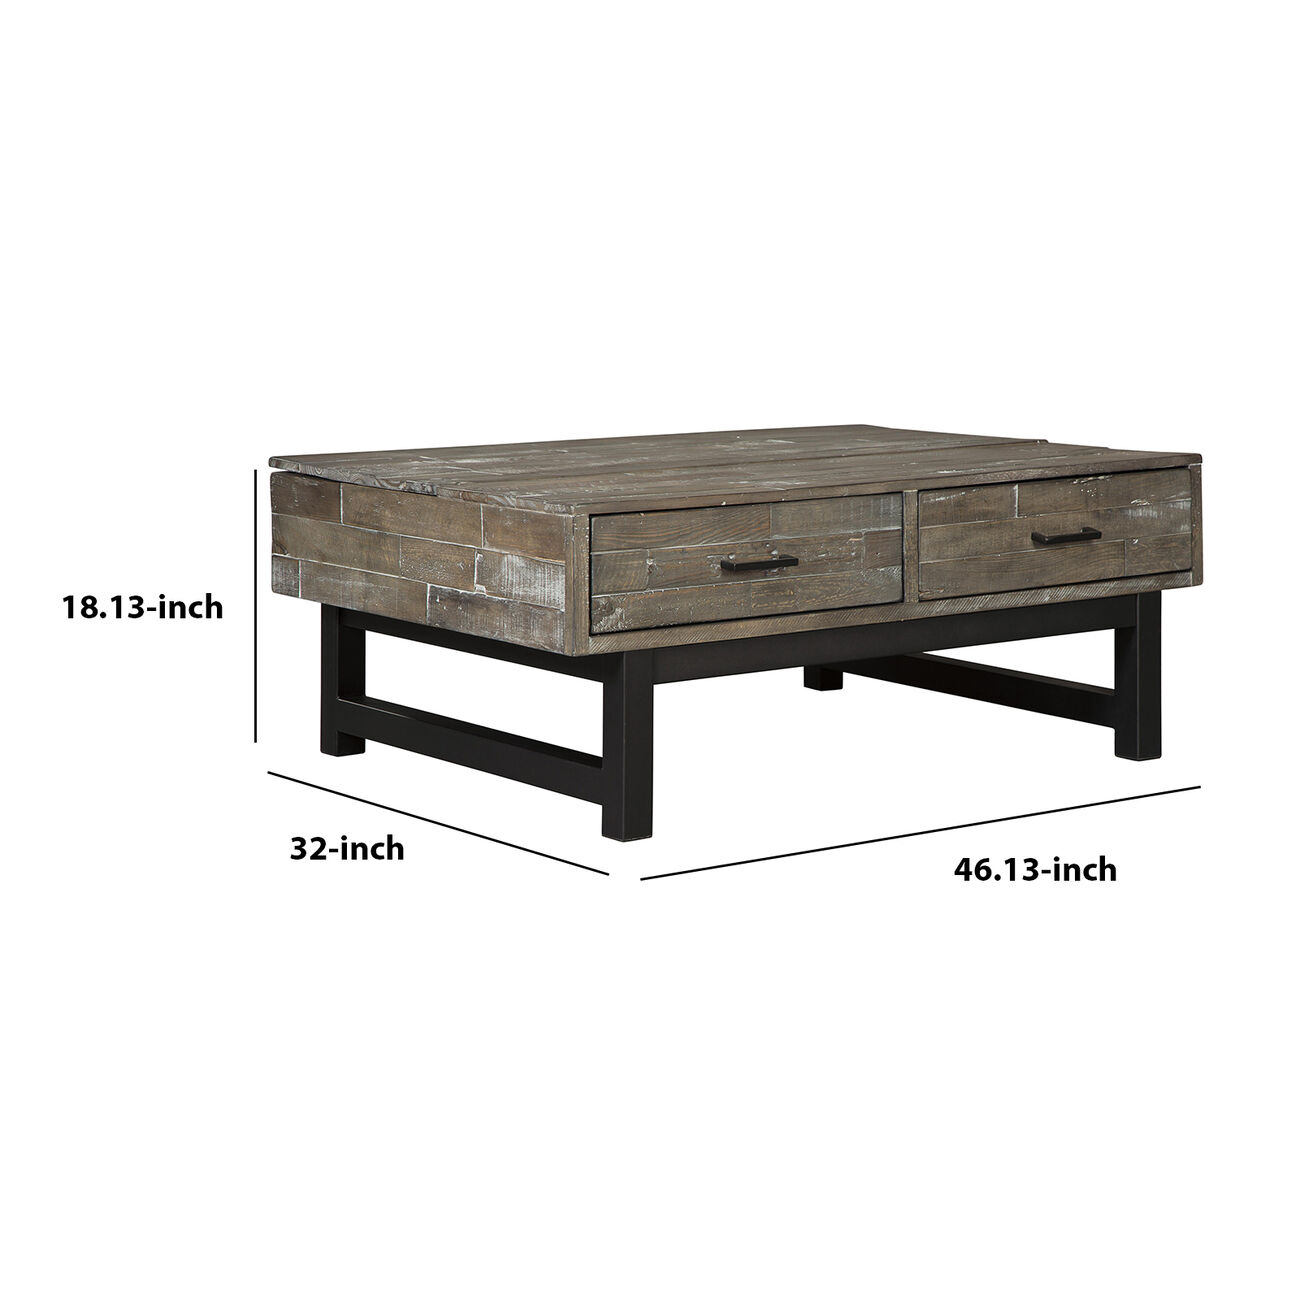 2 Drawer Wooden Lift Top Cocktail Table with Block Legs, Brown and Black